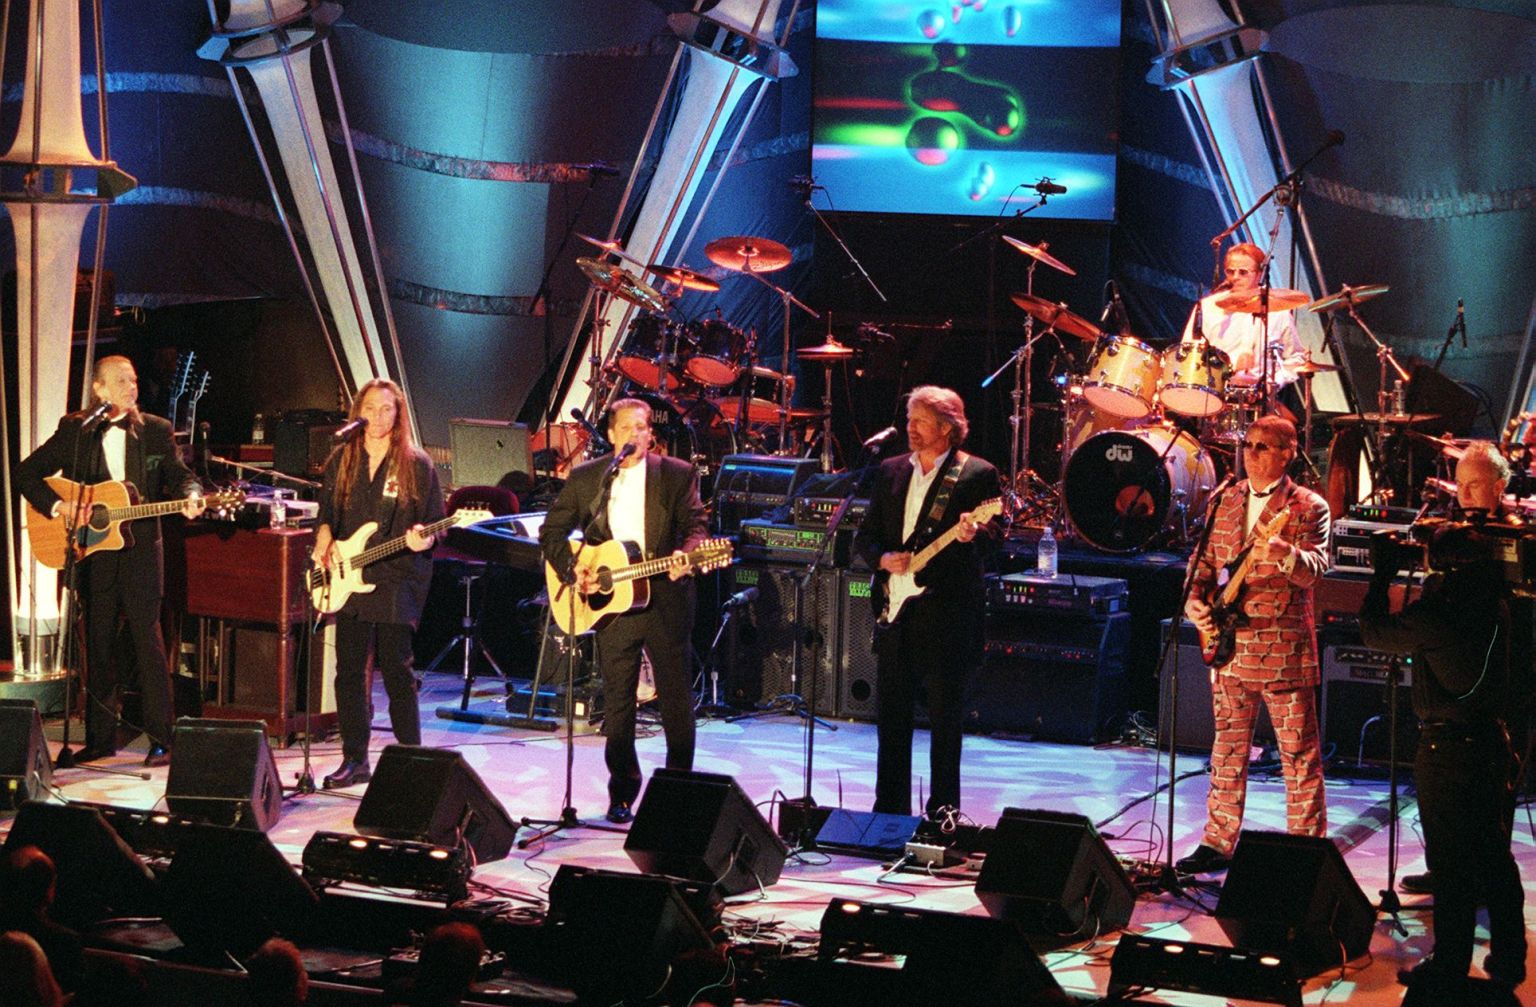 The Eagles performing onstage at the Rock and Roll Hall of Fame induction ceremony in 1998.